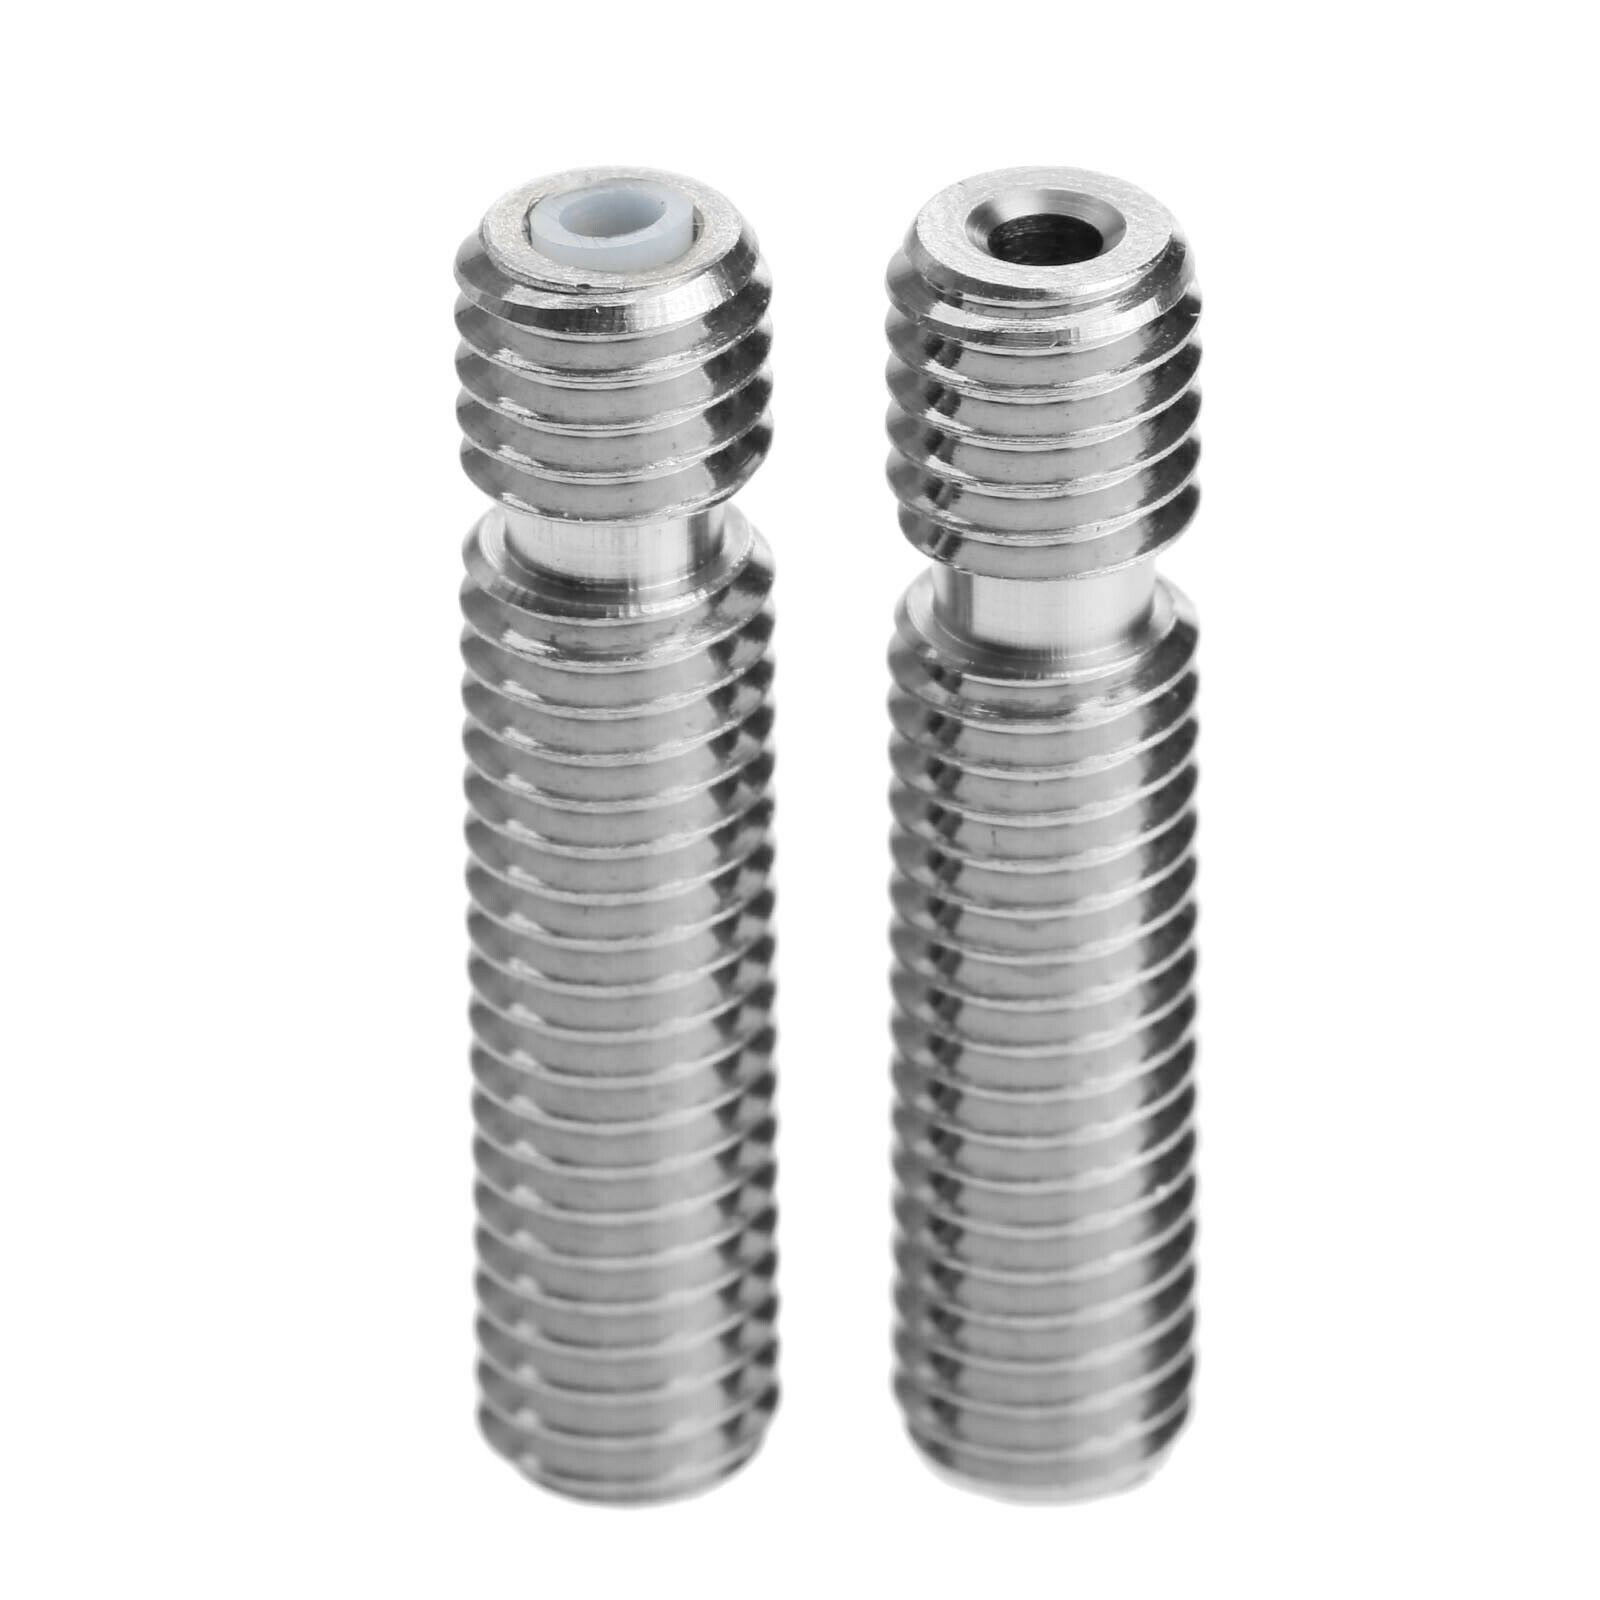 2pcs Stainless Steel M6 26mm Nozzle Heatbreak Pipe with Built-In PTFE Tube